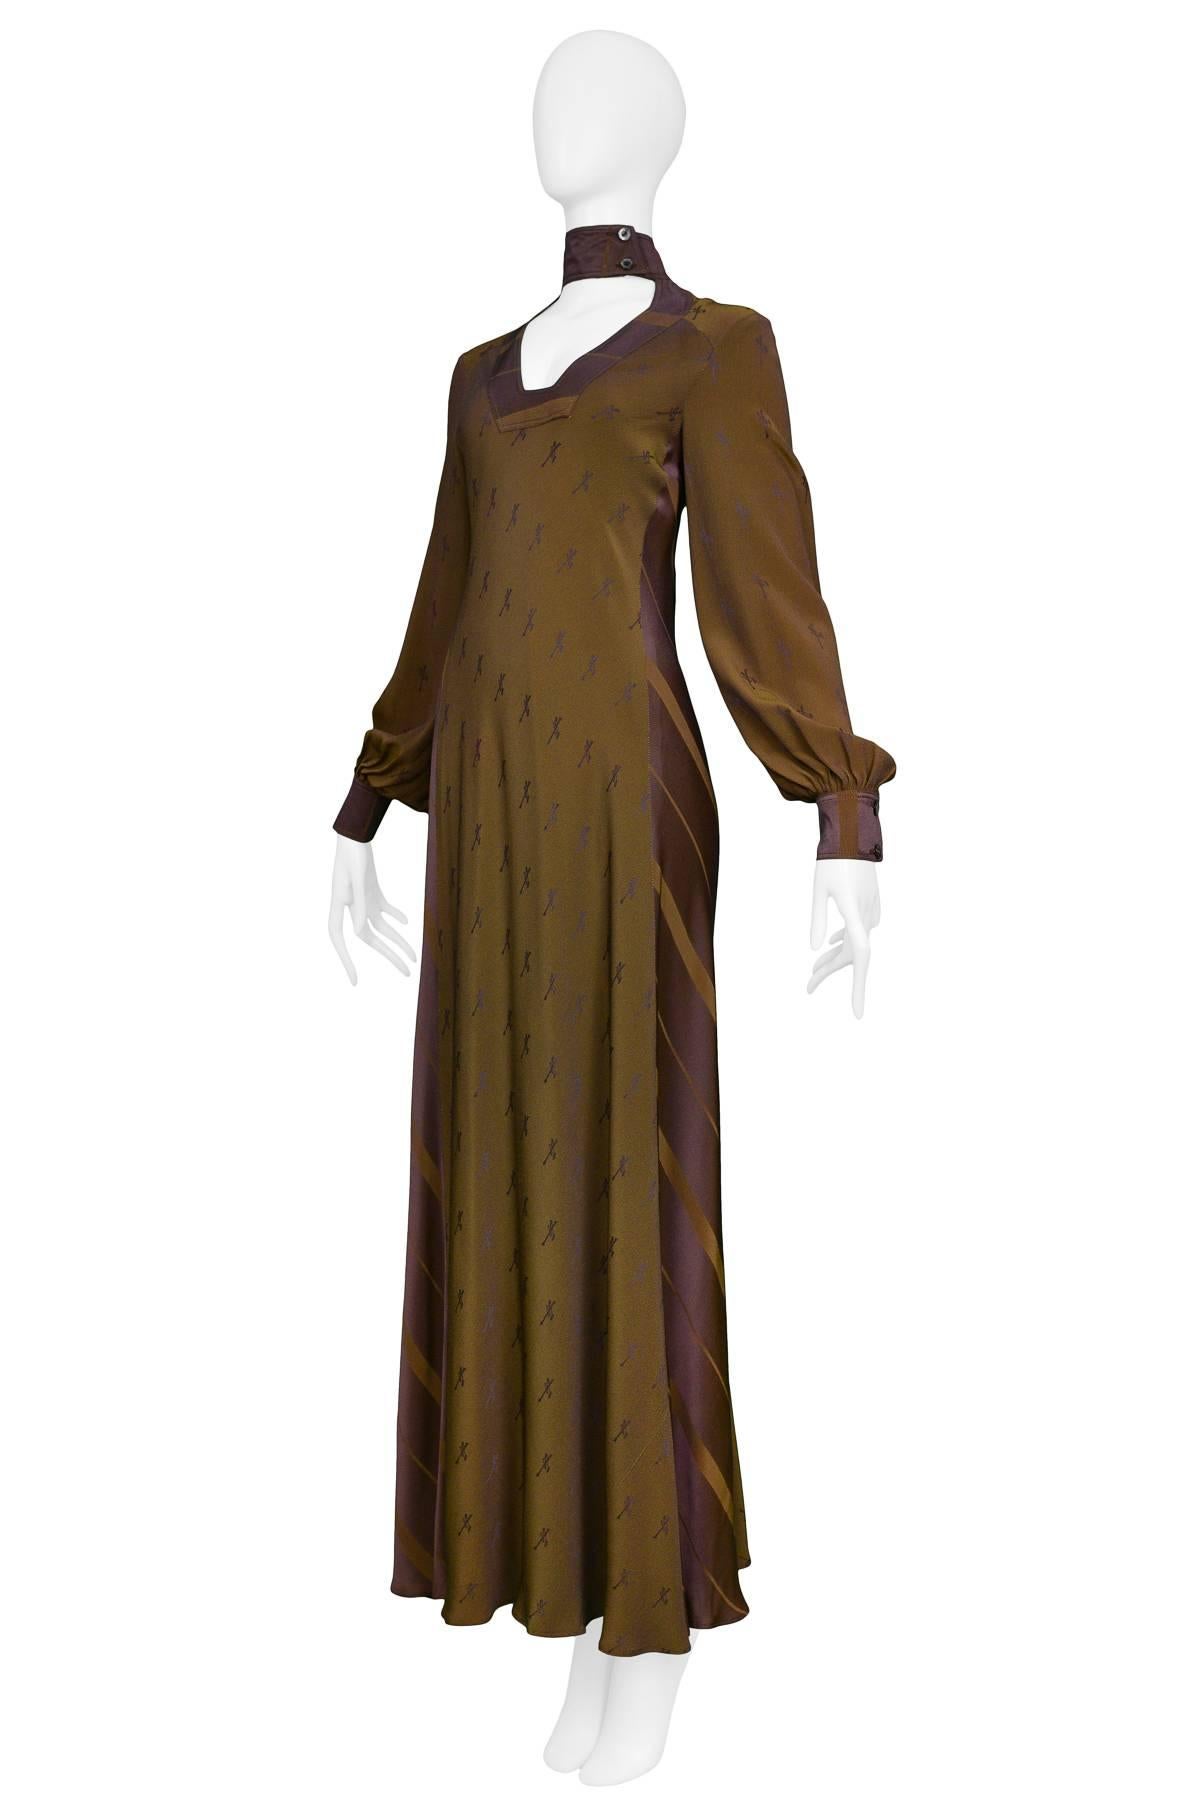 Brown Alice Pollock  Two Tone Cameo Gown 1978